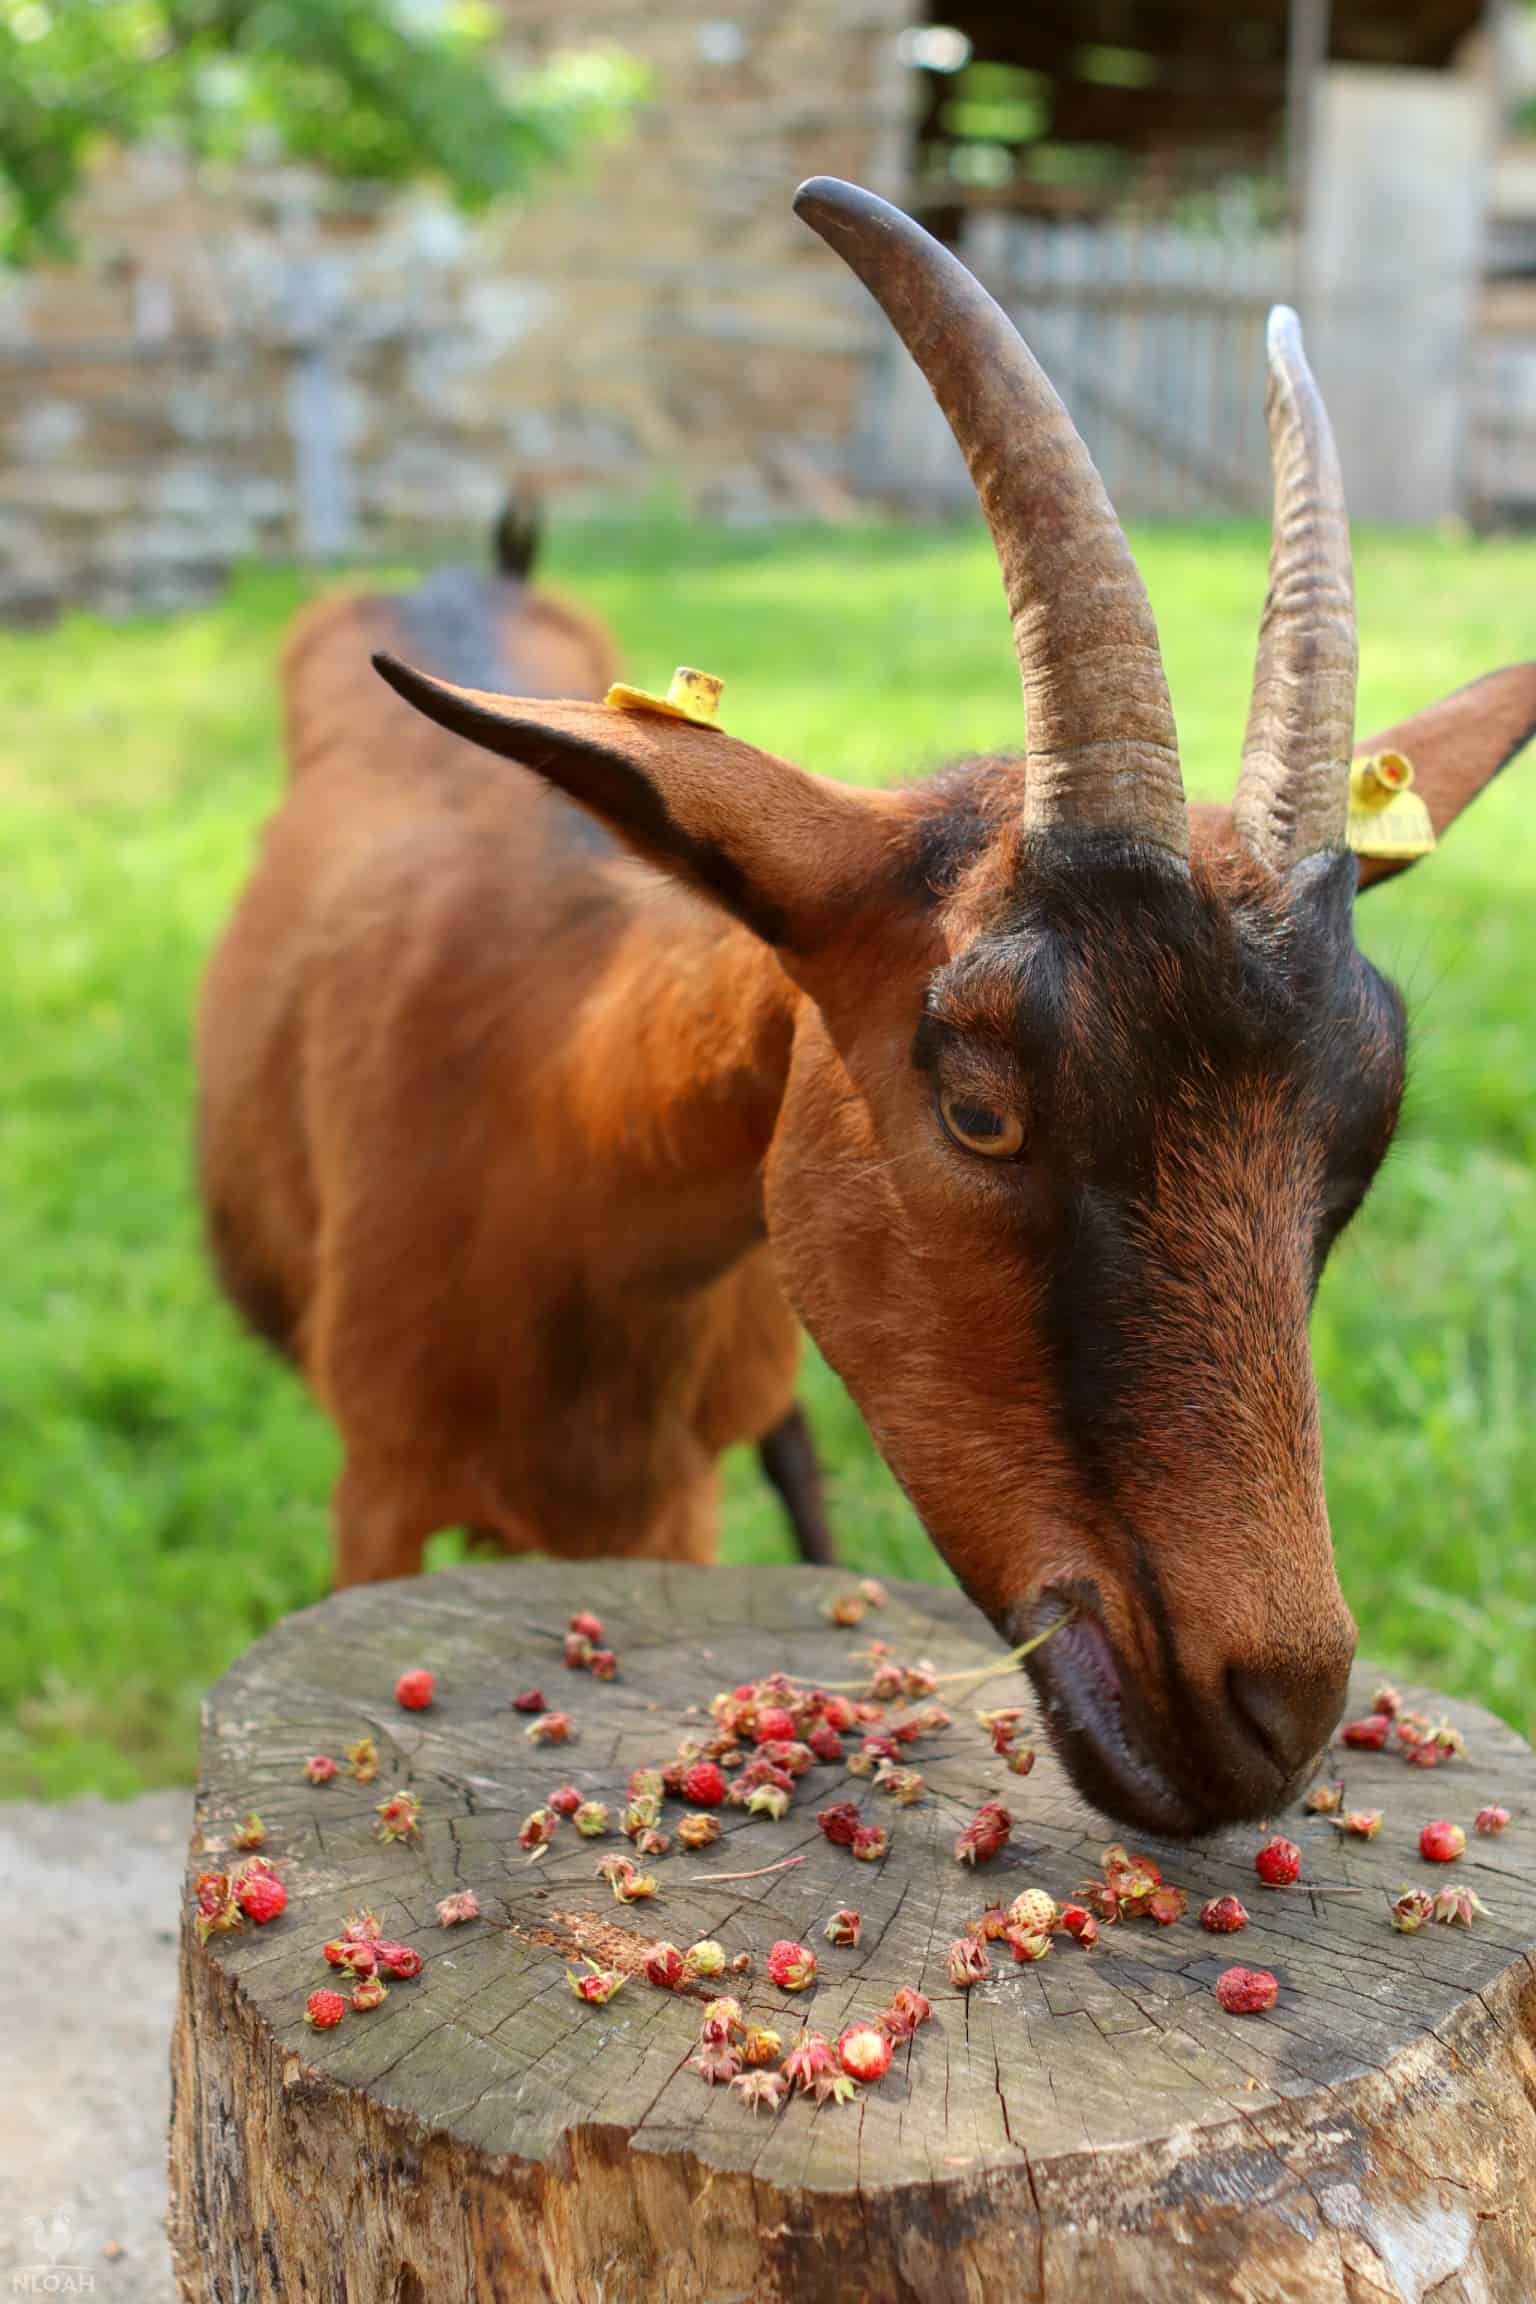 goat eating some wild strawberries